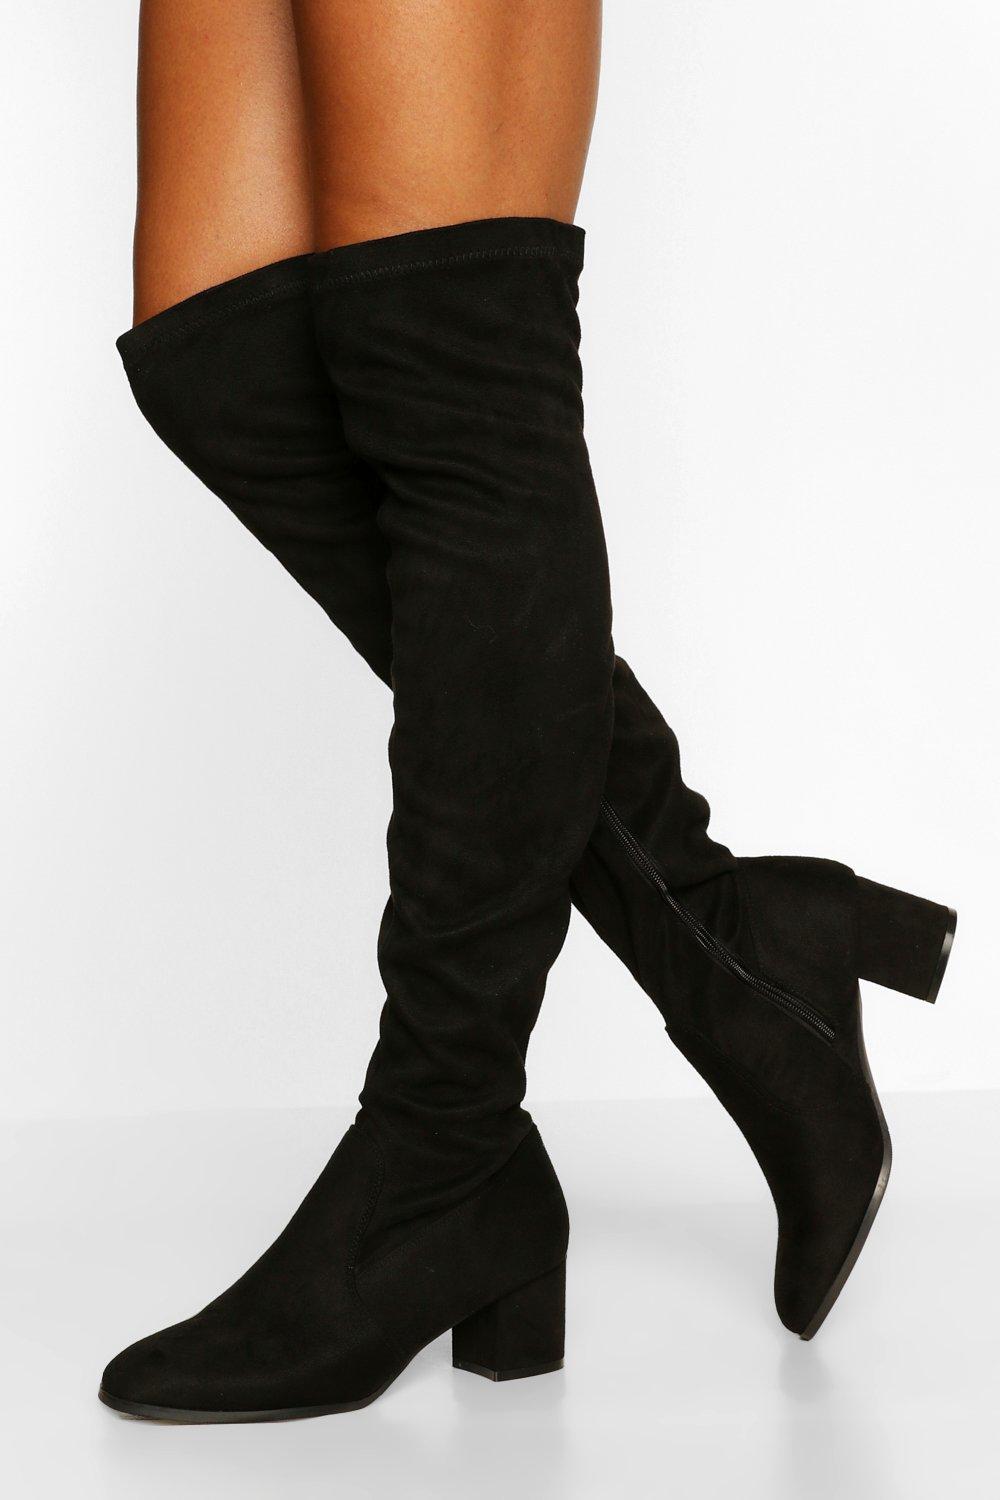 wide fit thigh boots uk